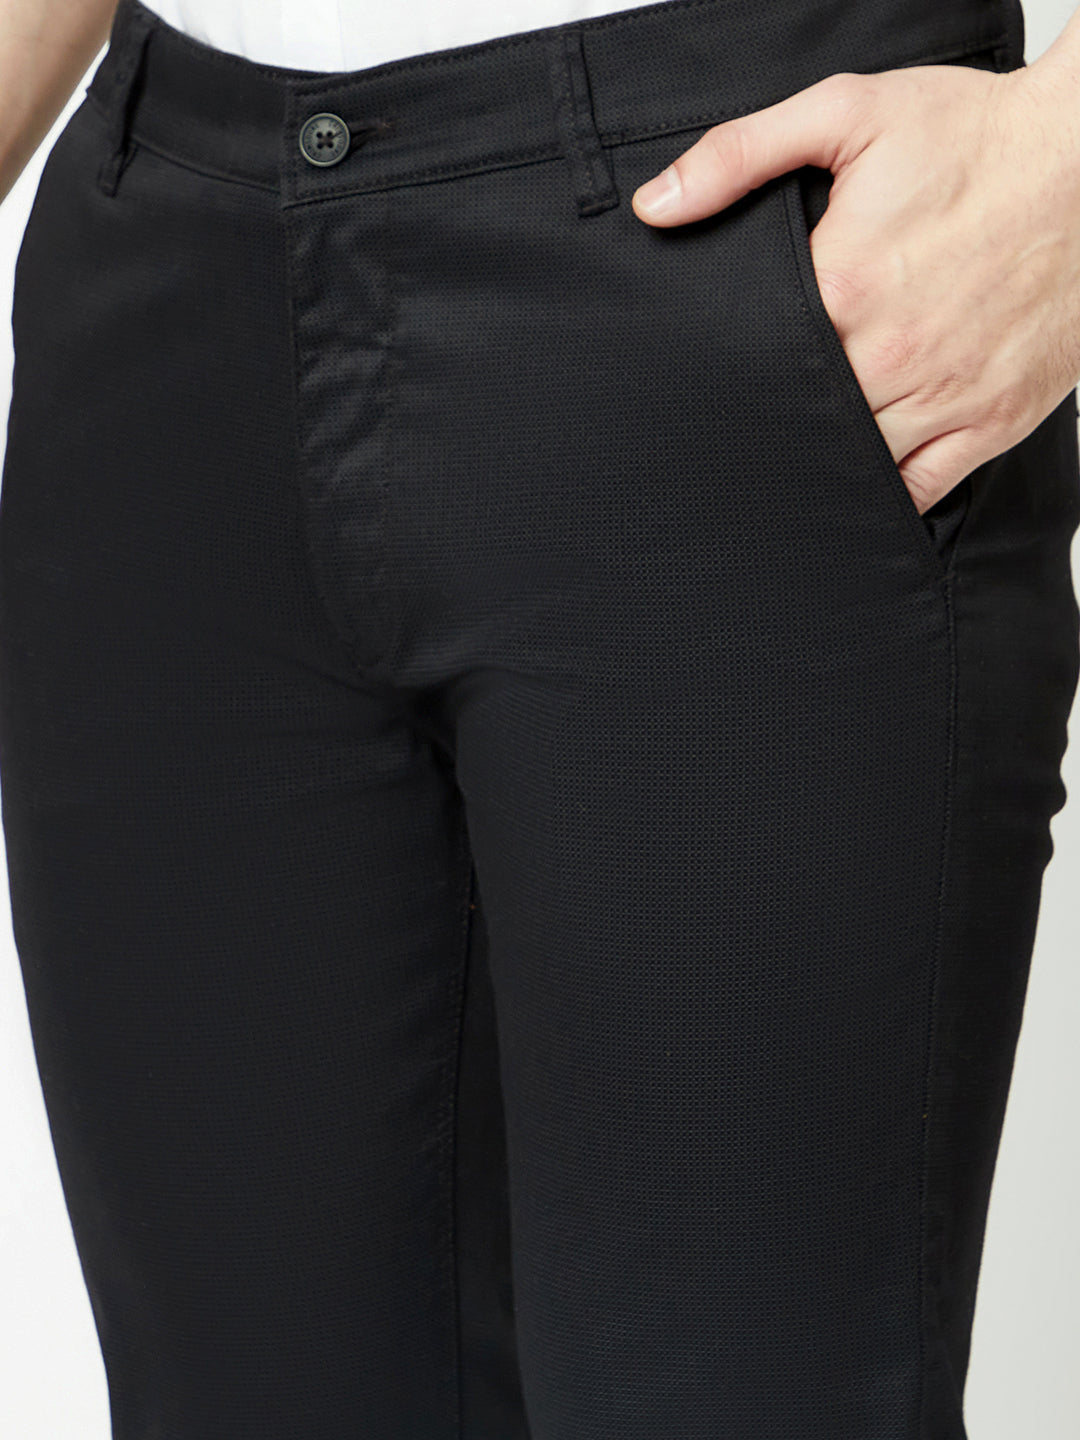  Black Textured Chino Trousers